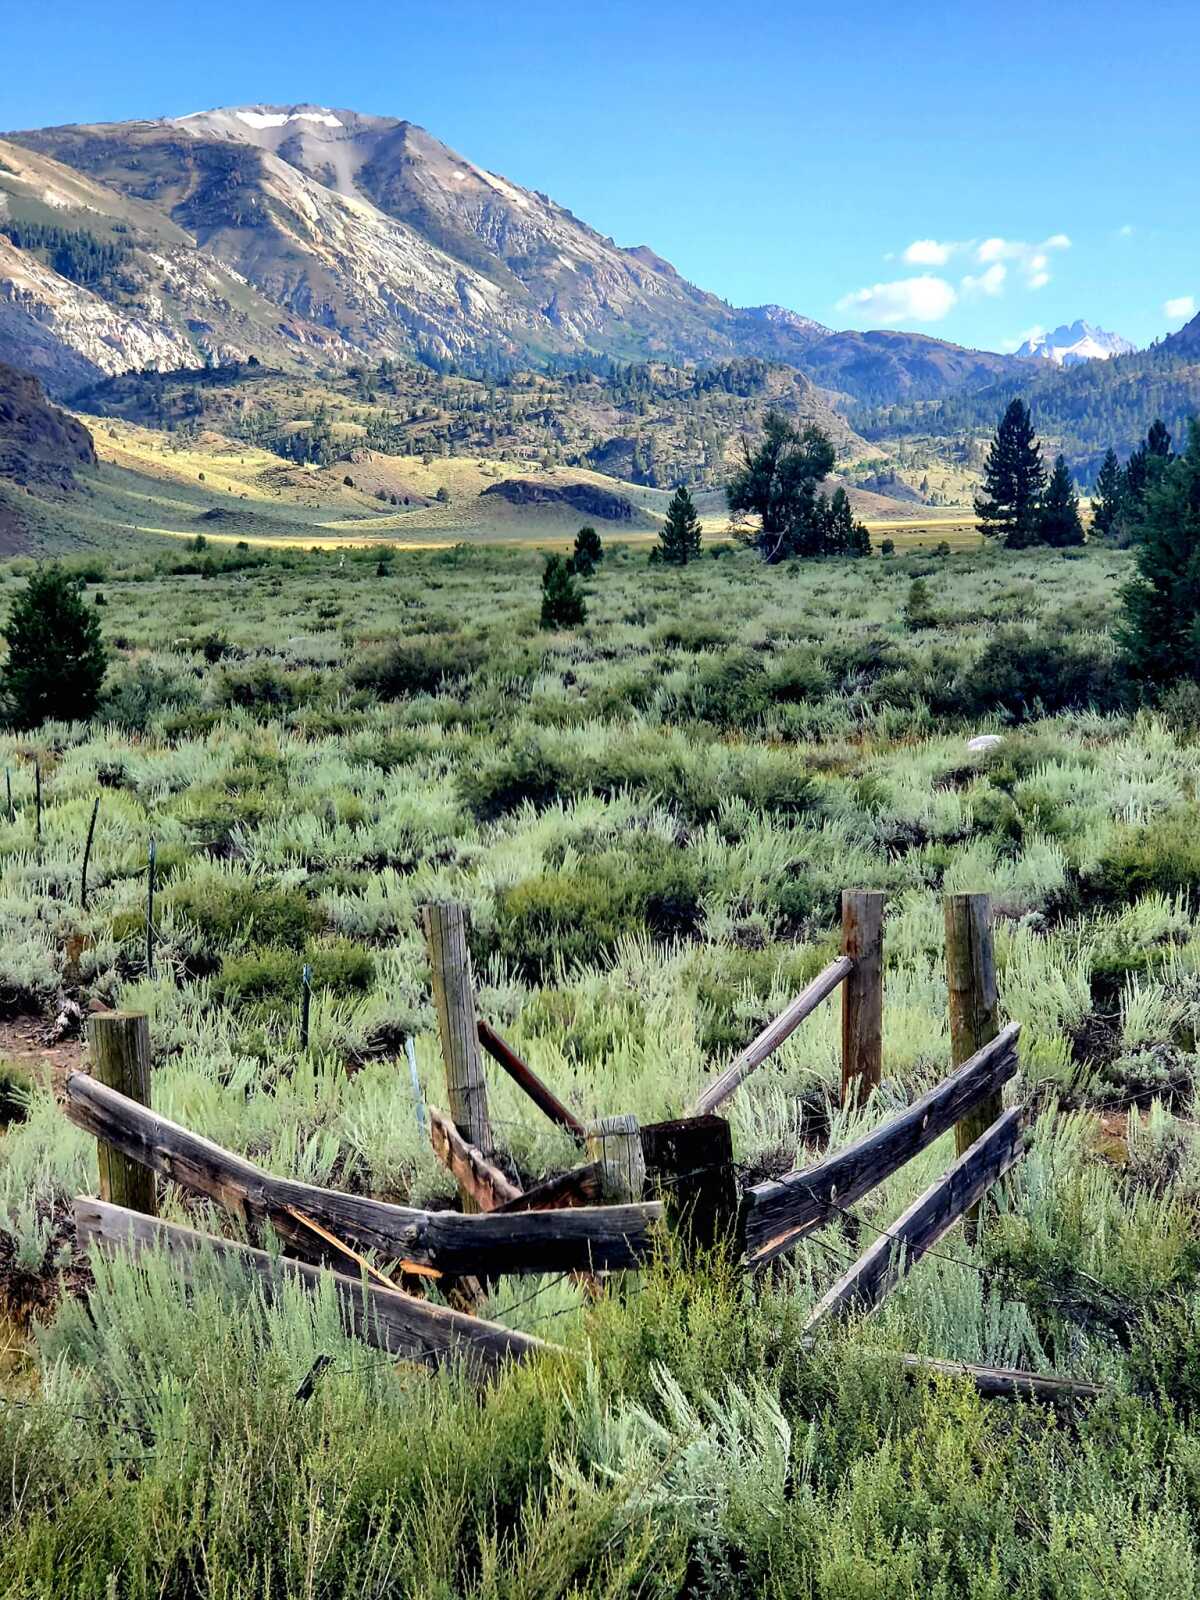 An old wooden fence stands in a green valley as a large mountain rises in the distance.